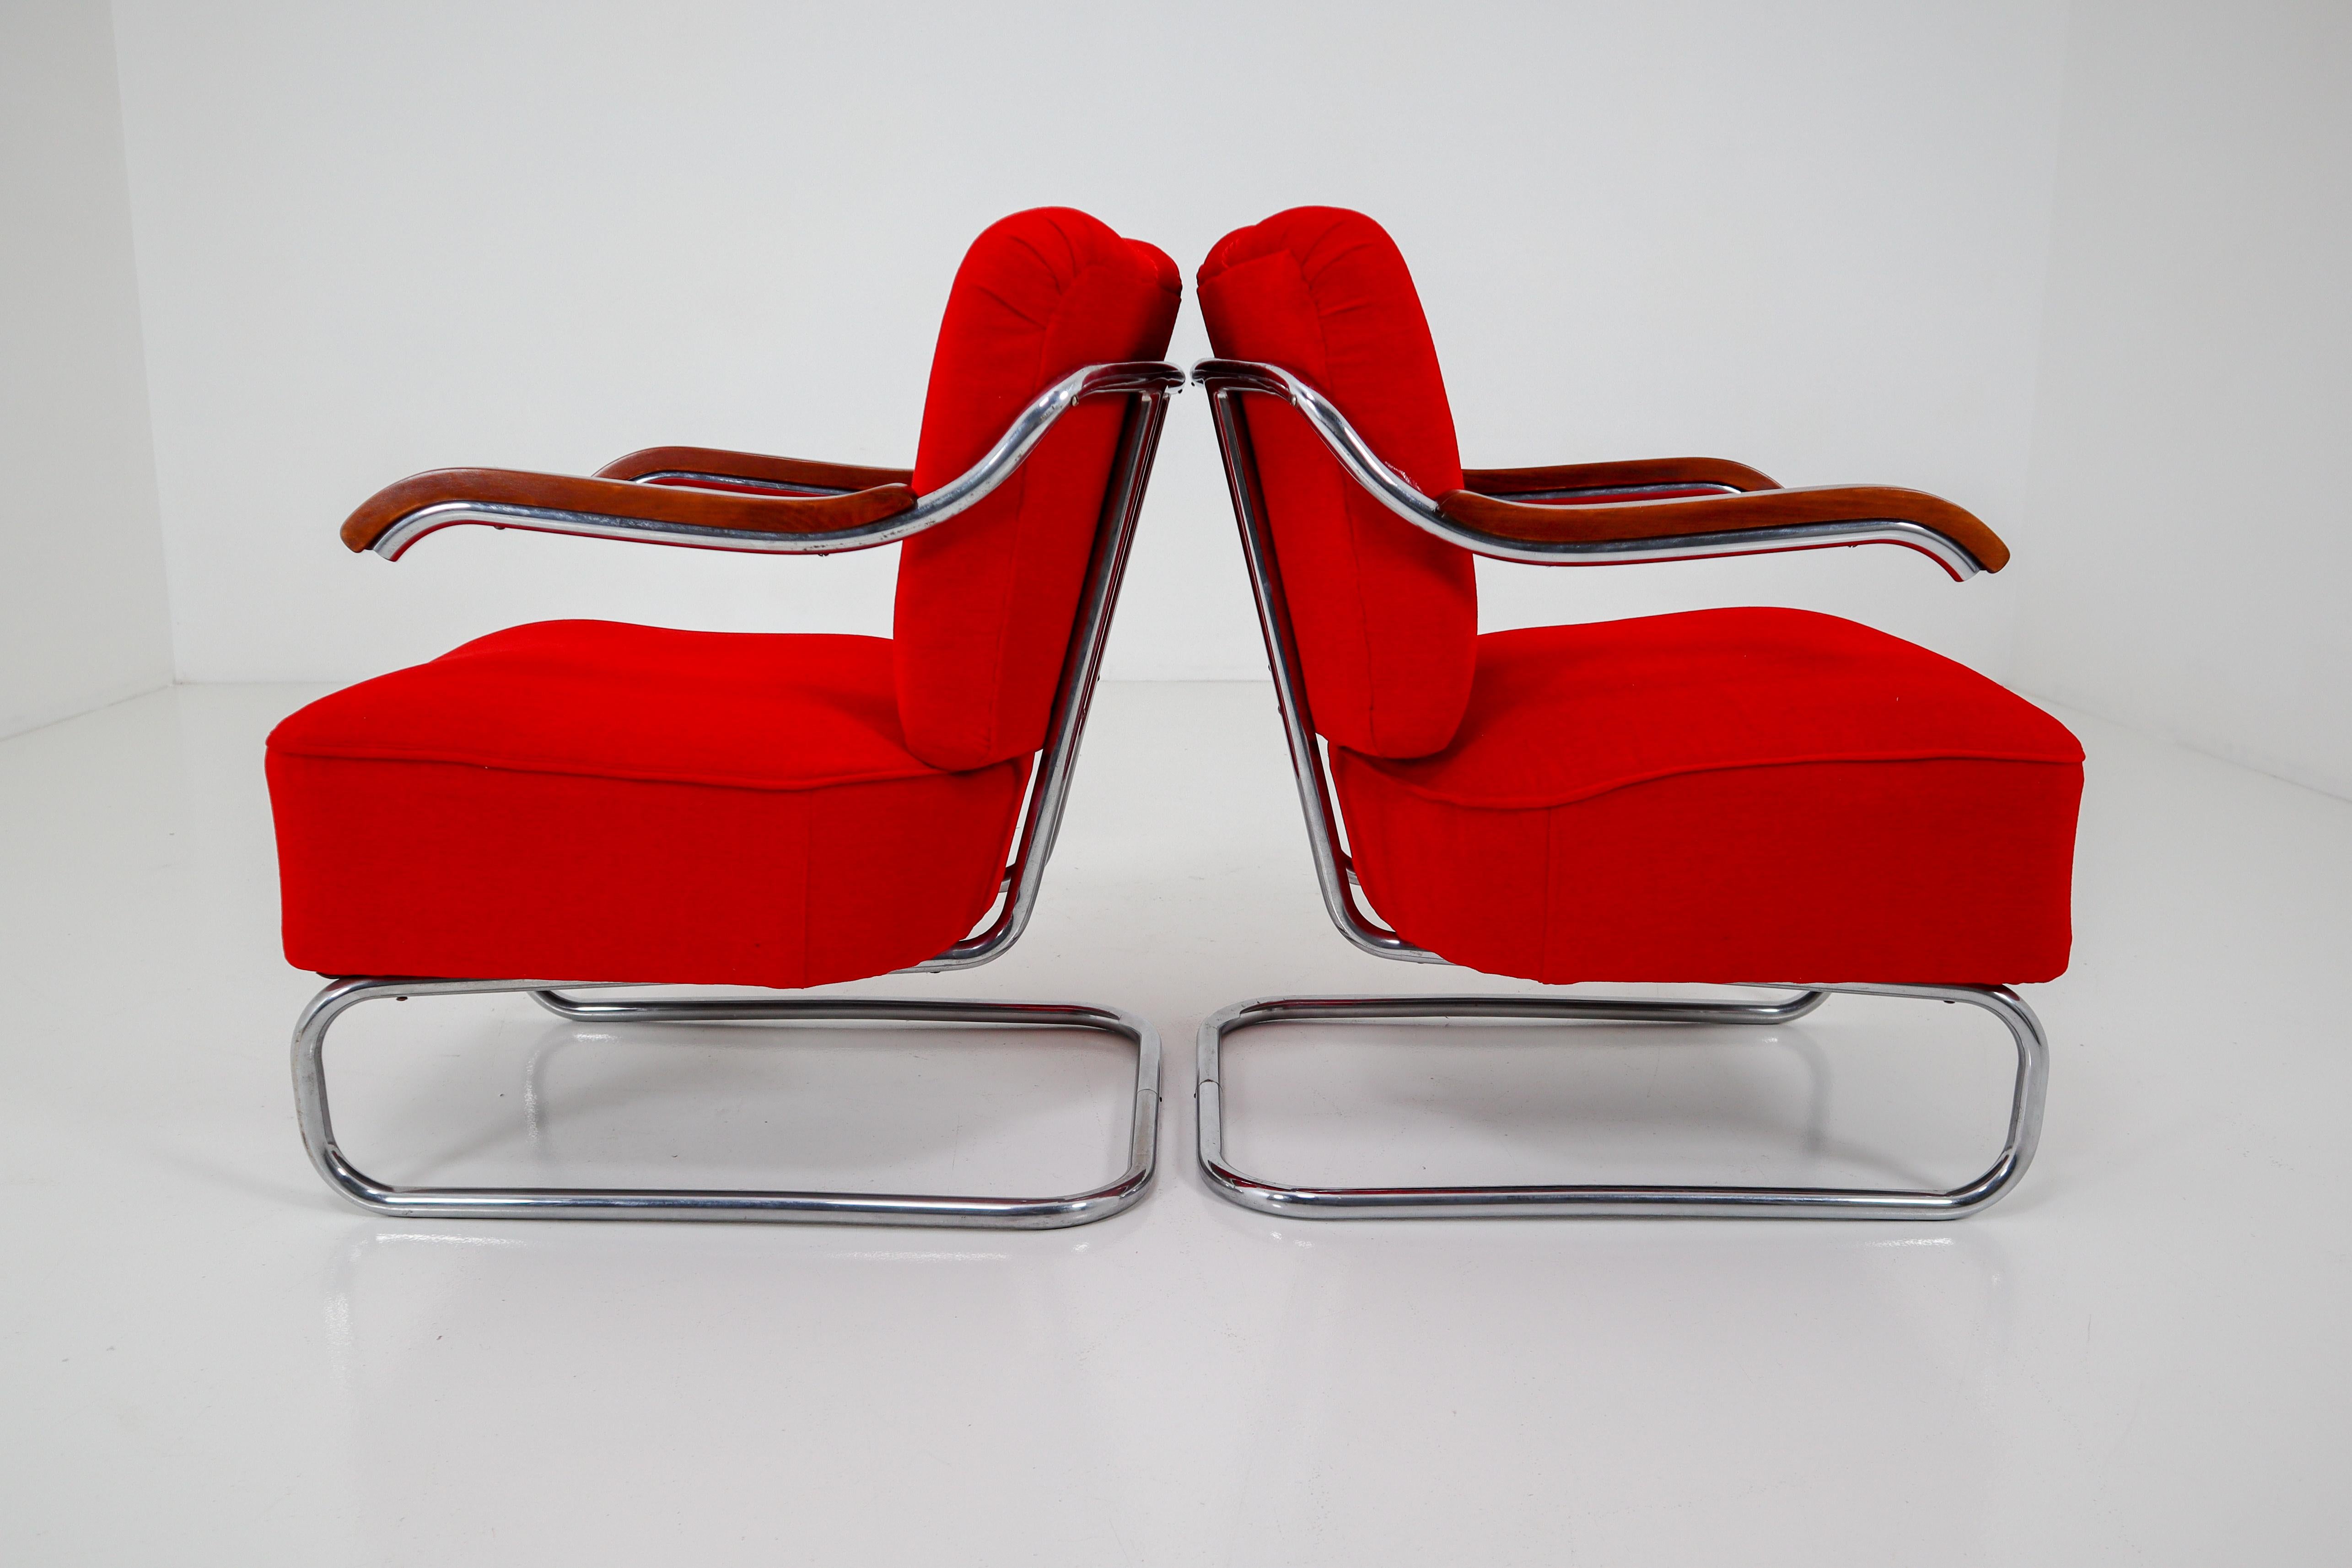 Amazing armchairs by Thonet circa 1920s midcentury Bauhaus period. These armchairs are typical for the German and Eastern Europe Bauhaus era. These armchairs has a tubular steel frame and is
Re-upholstered with a red fabric. The original armrests